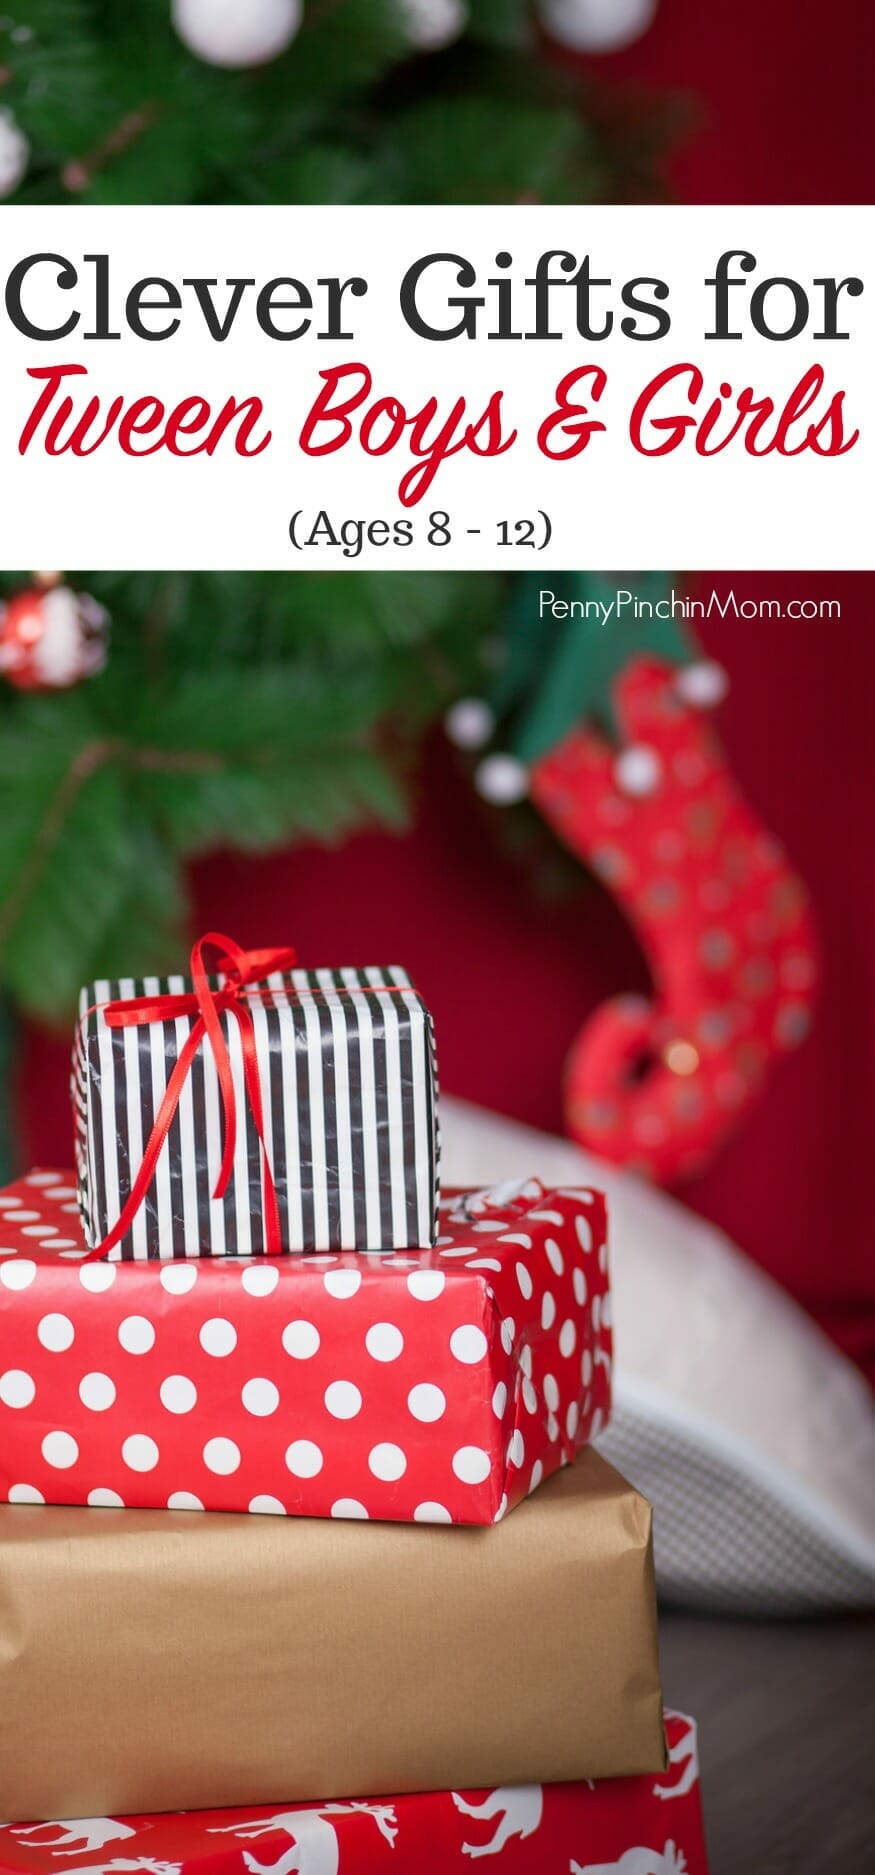 Gift Ideas for Kids Ages 8 - 12 (For Girls and Boys)